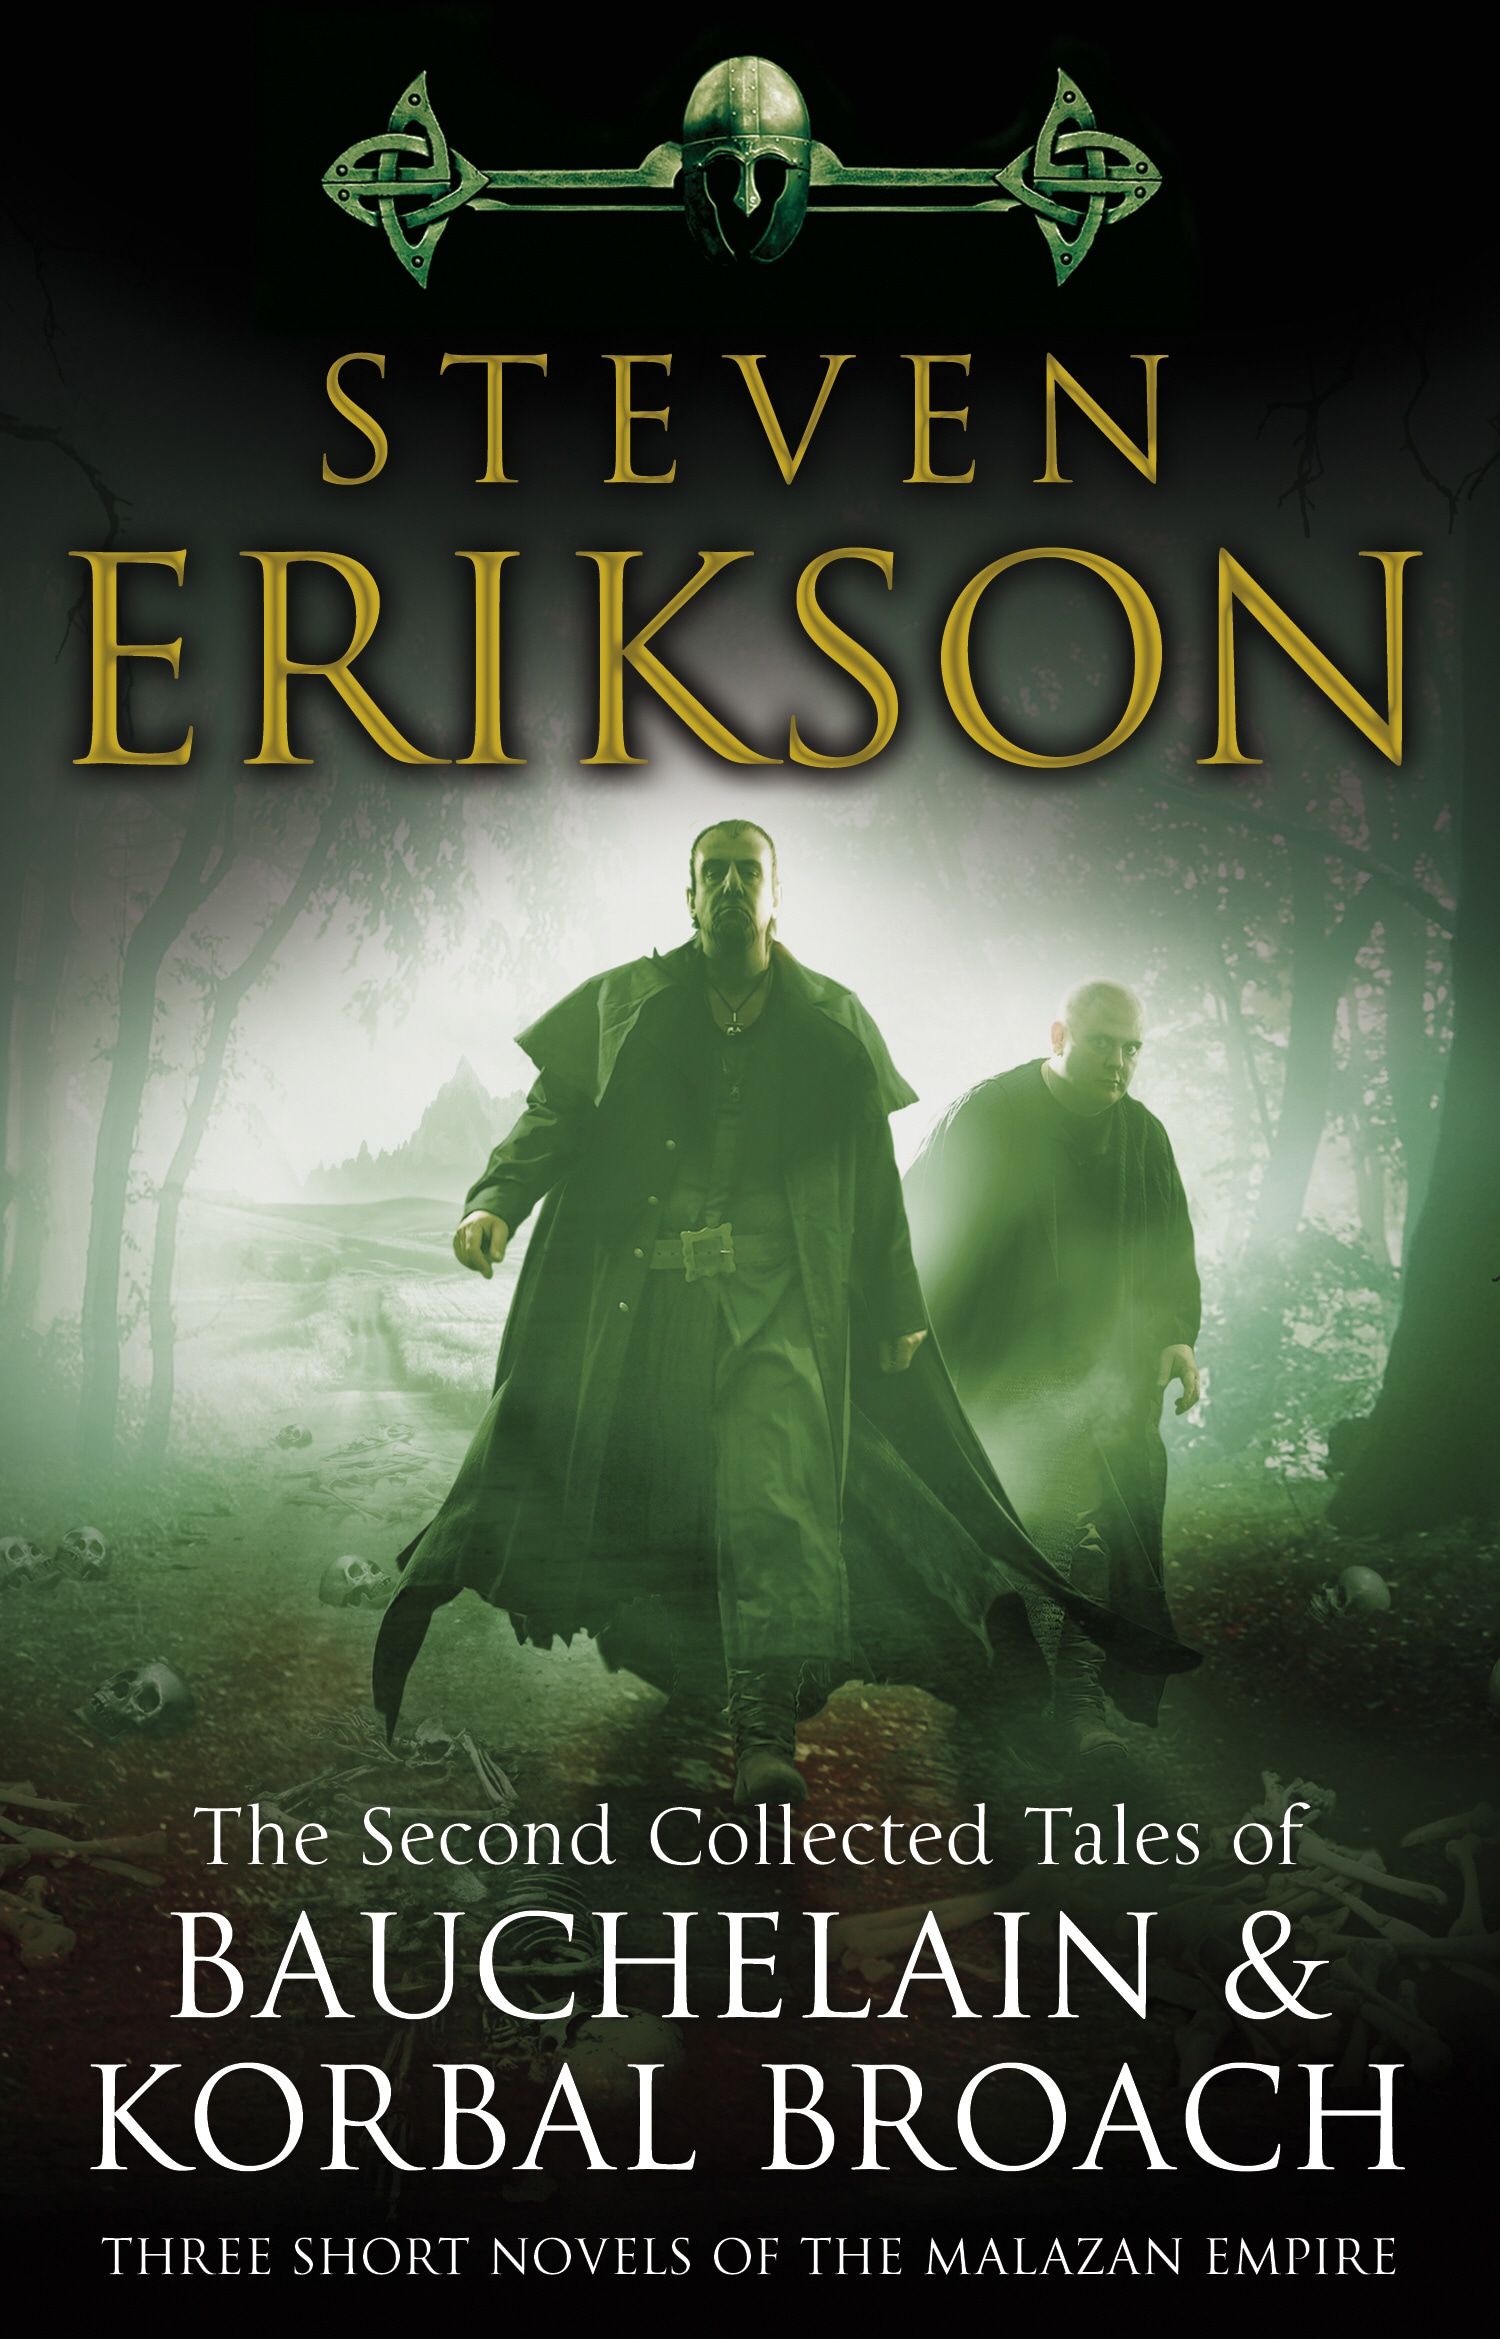 Book “The Second Collected Tales of Bauchelain & Korbal Broach” by Steven Erikson